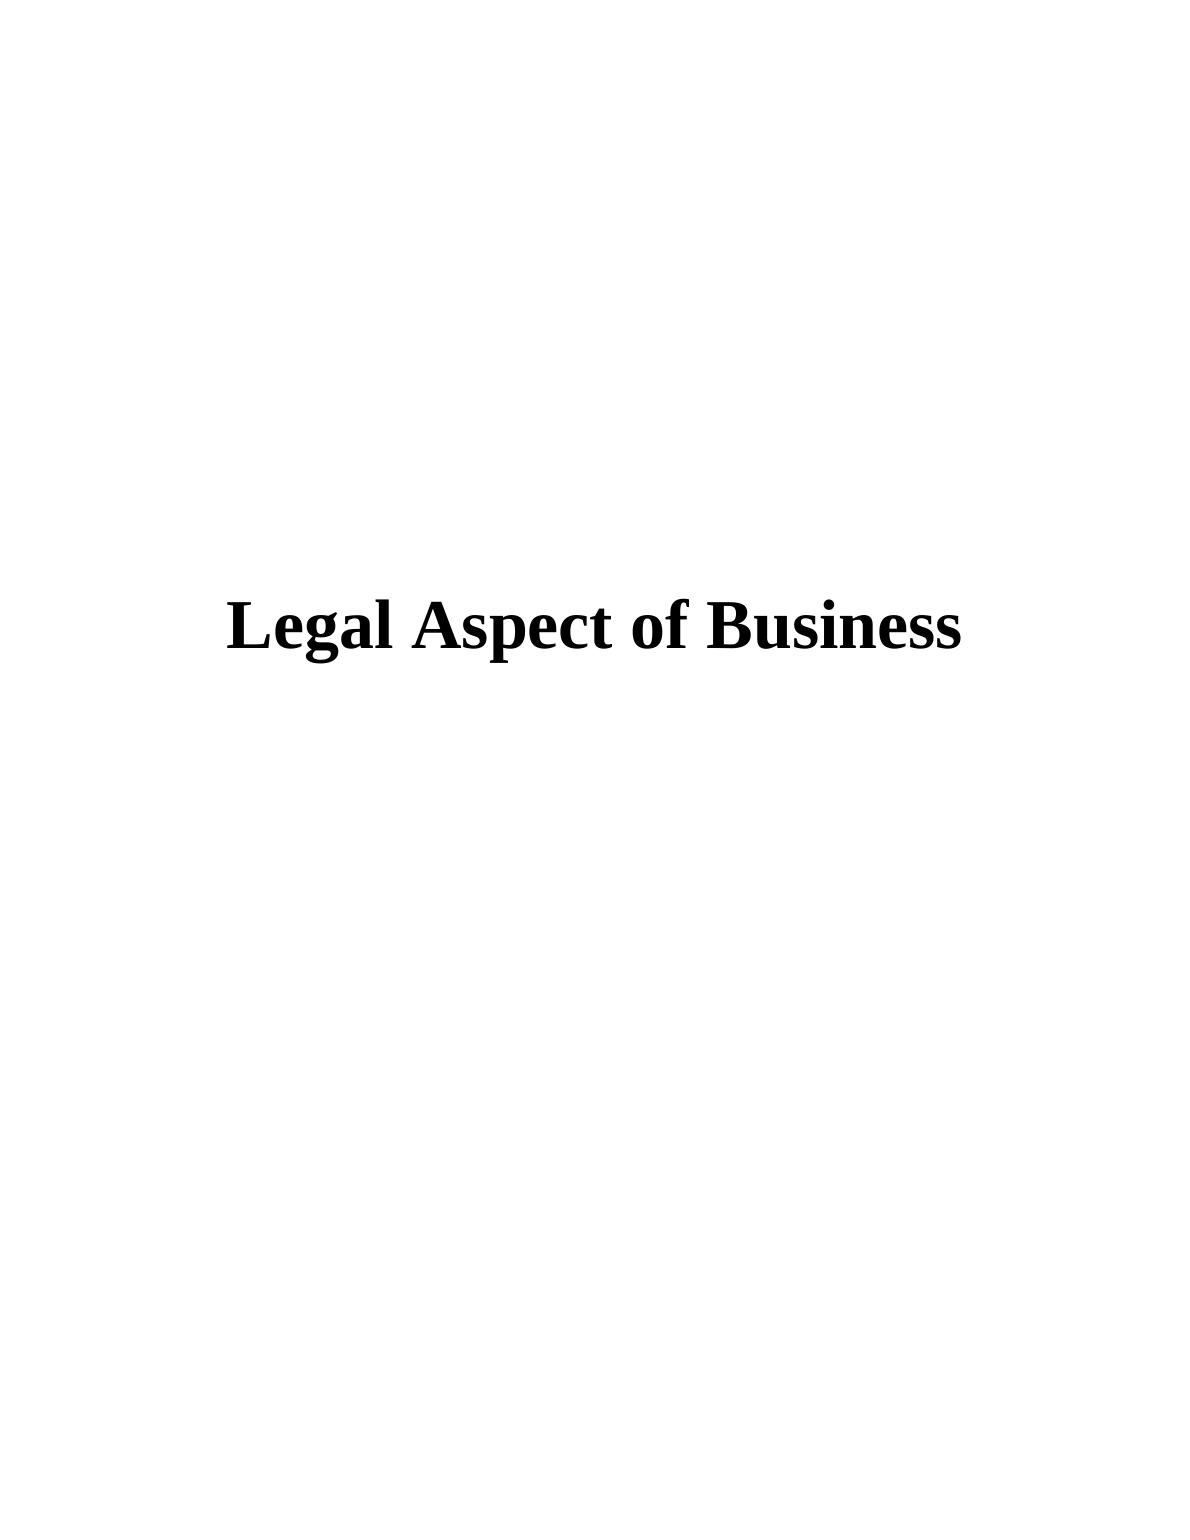 Legal Aspect of Business - Assignment_1